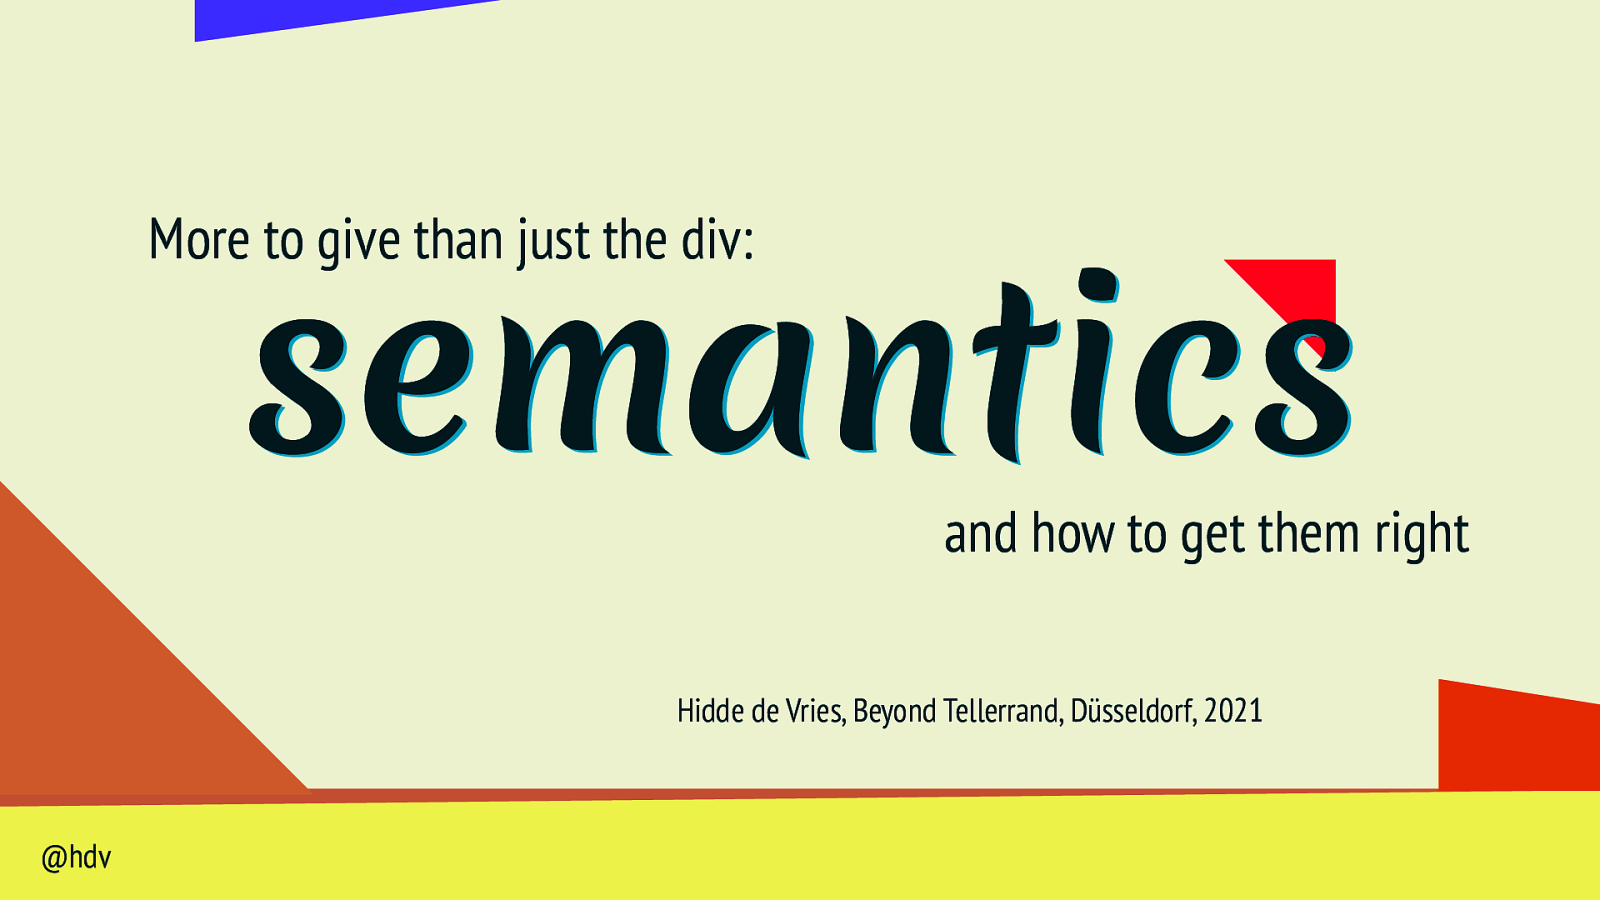 More to give than just the div: semantics and how to get them right